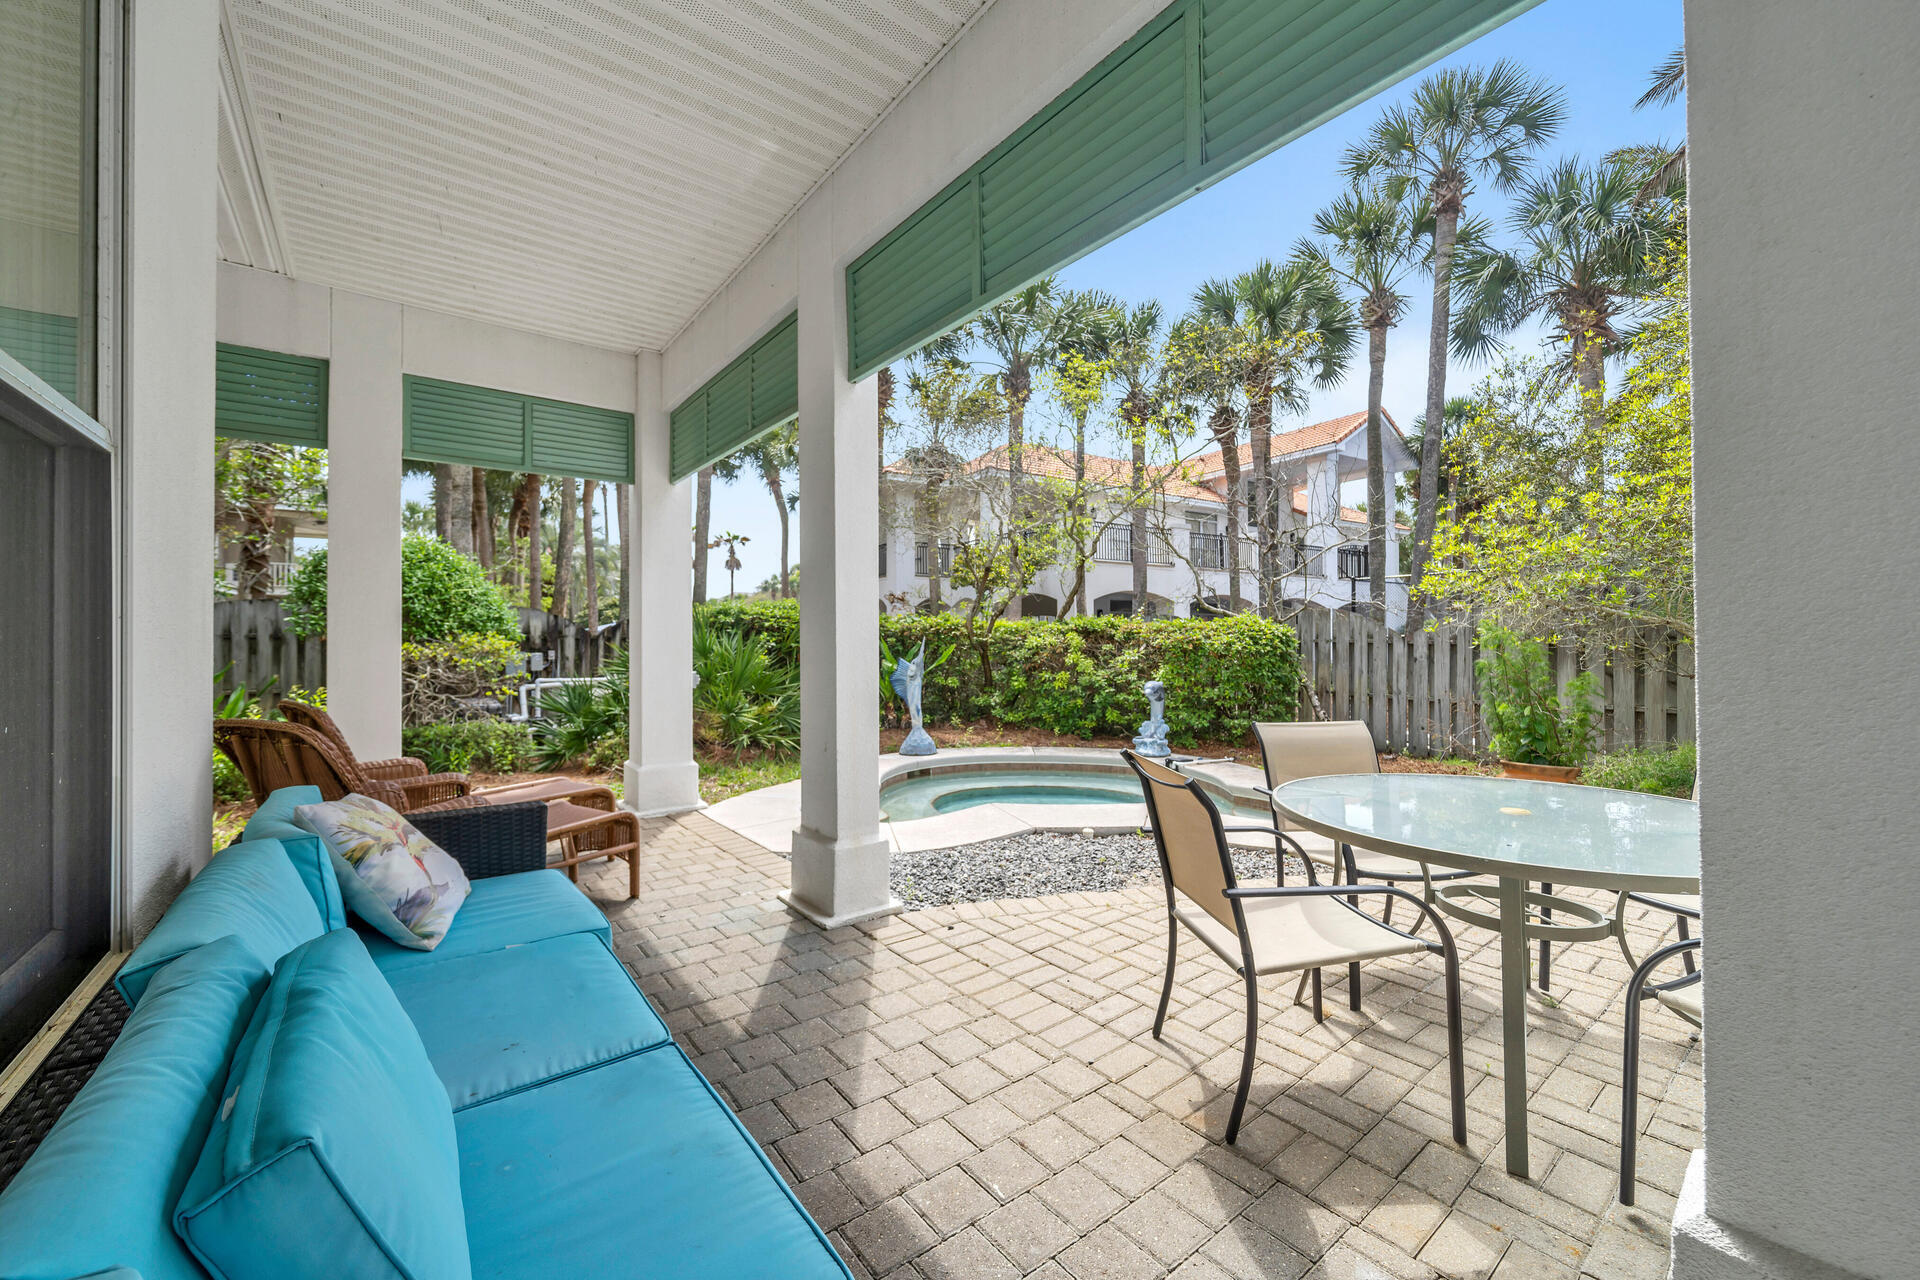 77 Cayman Cove, Destin, Florida, 32541, United States, 4 Bedrooms Bedrooms, ,4 BathroomsBathrooms,Residential,For Sale,77 Cayman Cove,1488411